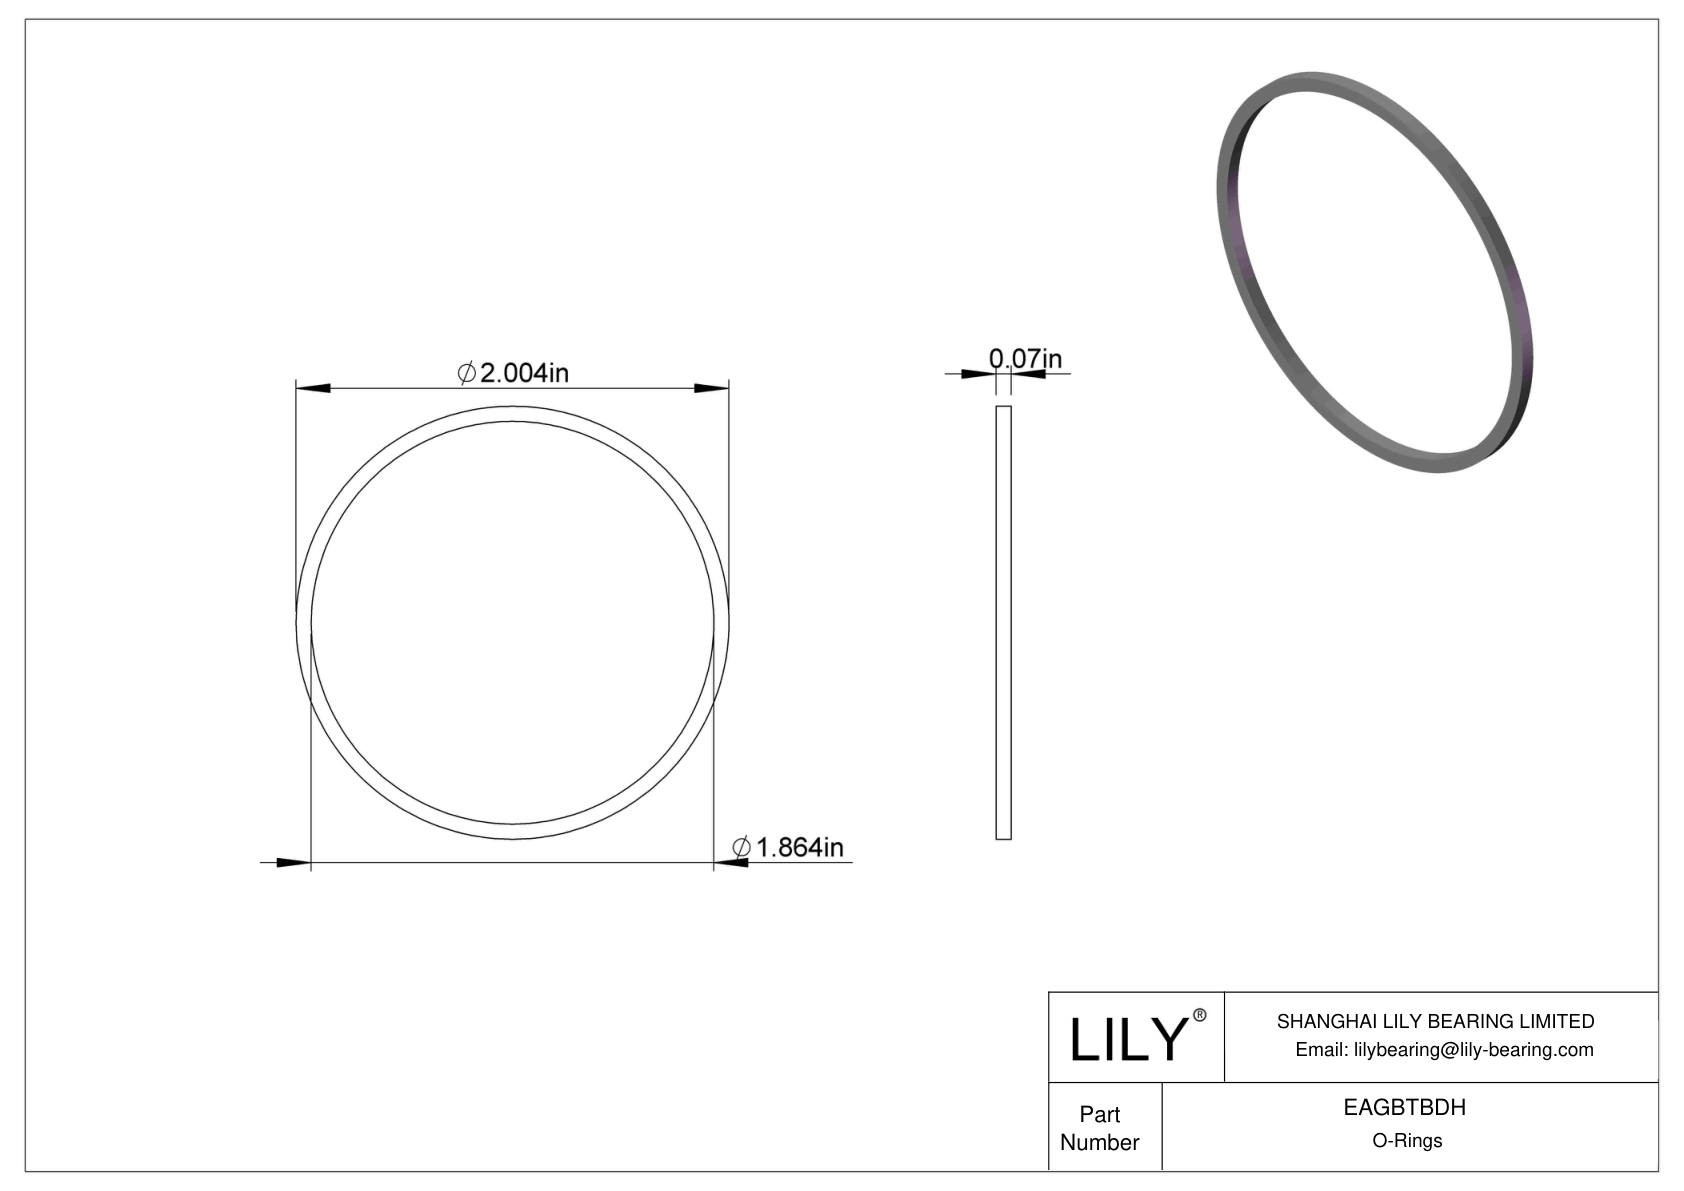 EAGBTBDH Oil Resistant O-Rings Square cad drawing